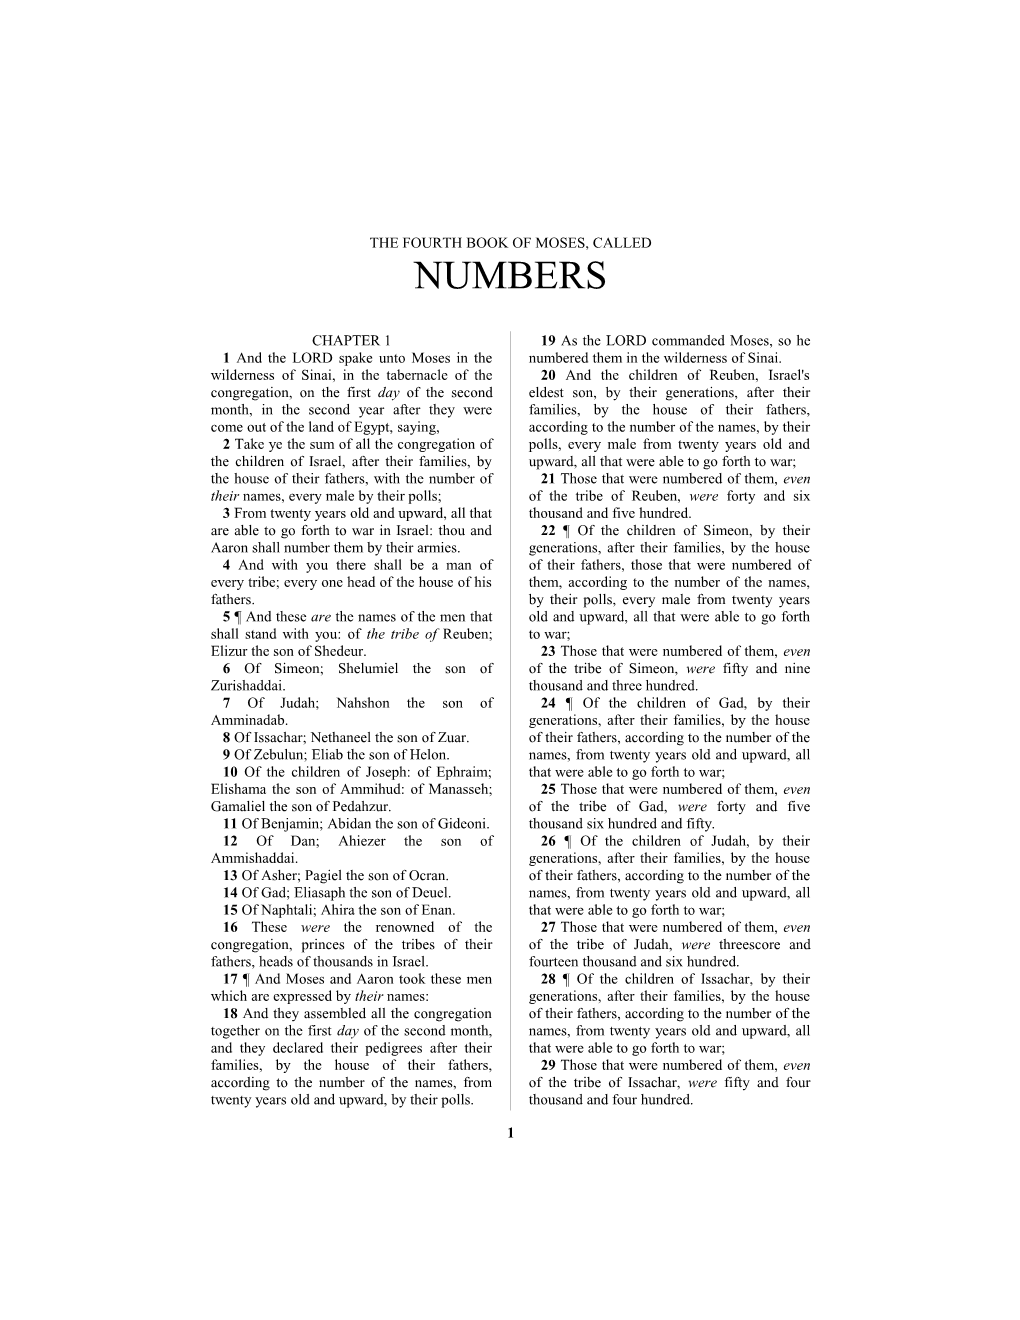 The Fourth Book of Moses, Called Numbers